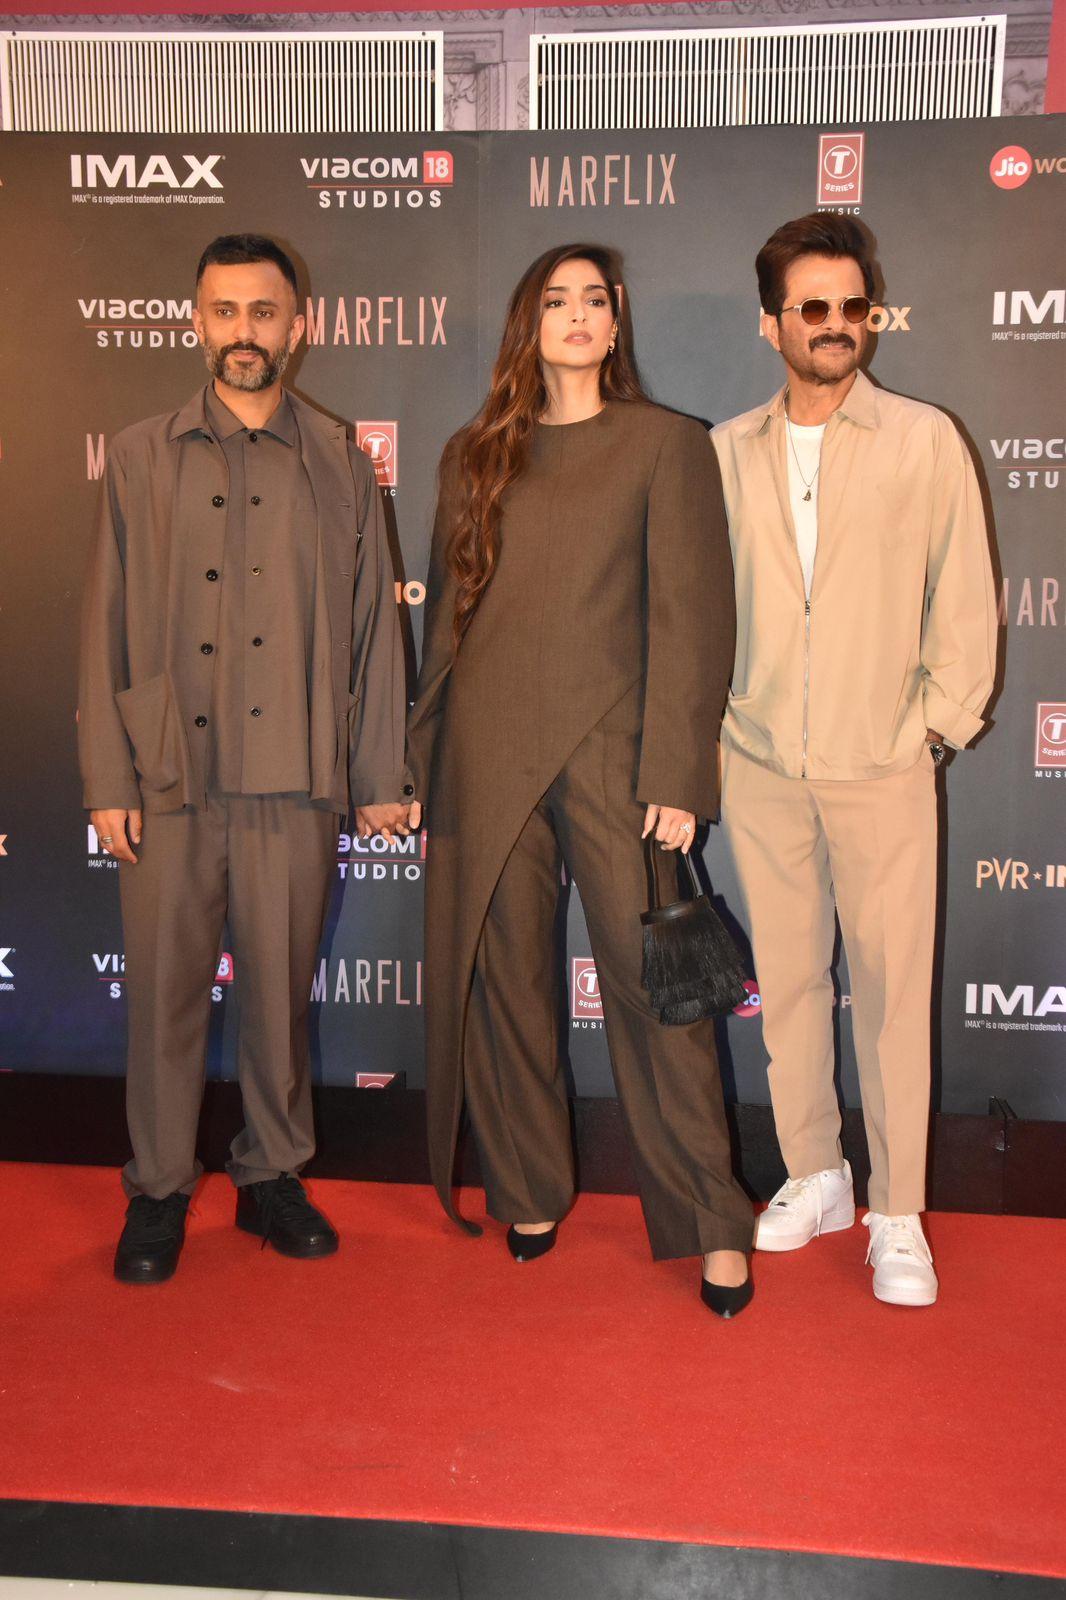 Anil Kapoor's daughter, Sonam joined her father along with her husband Anand to celebrate the movie premiere